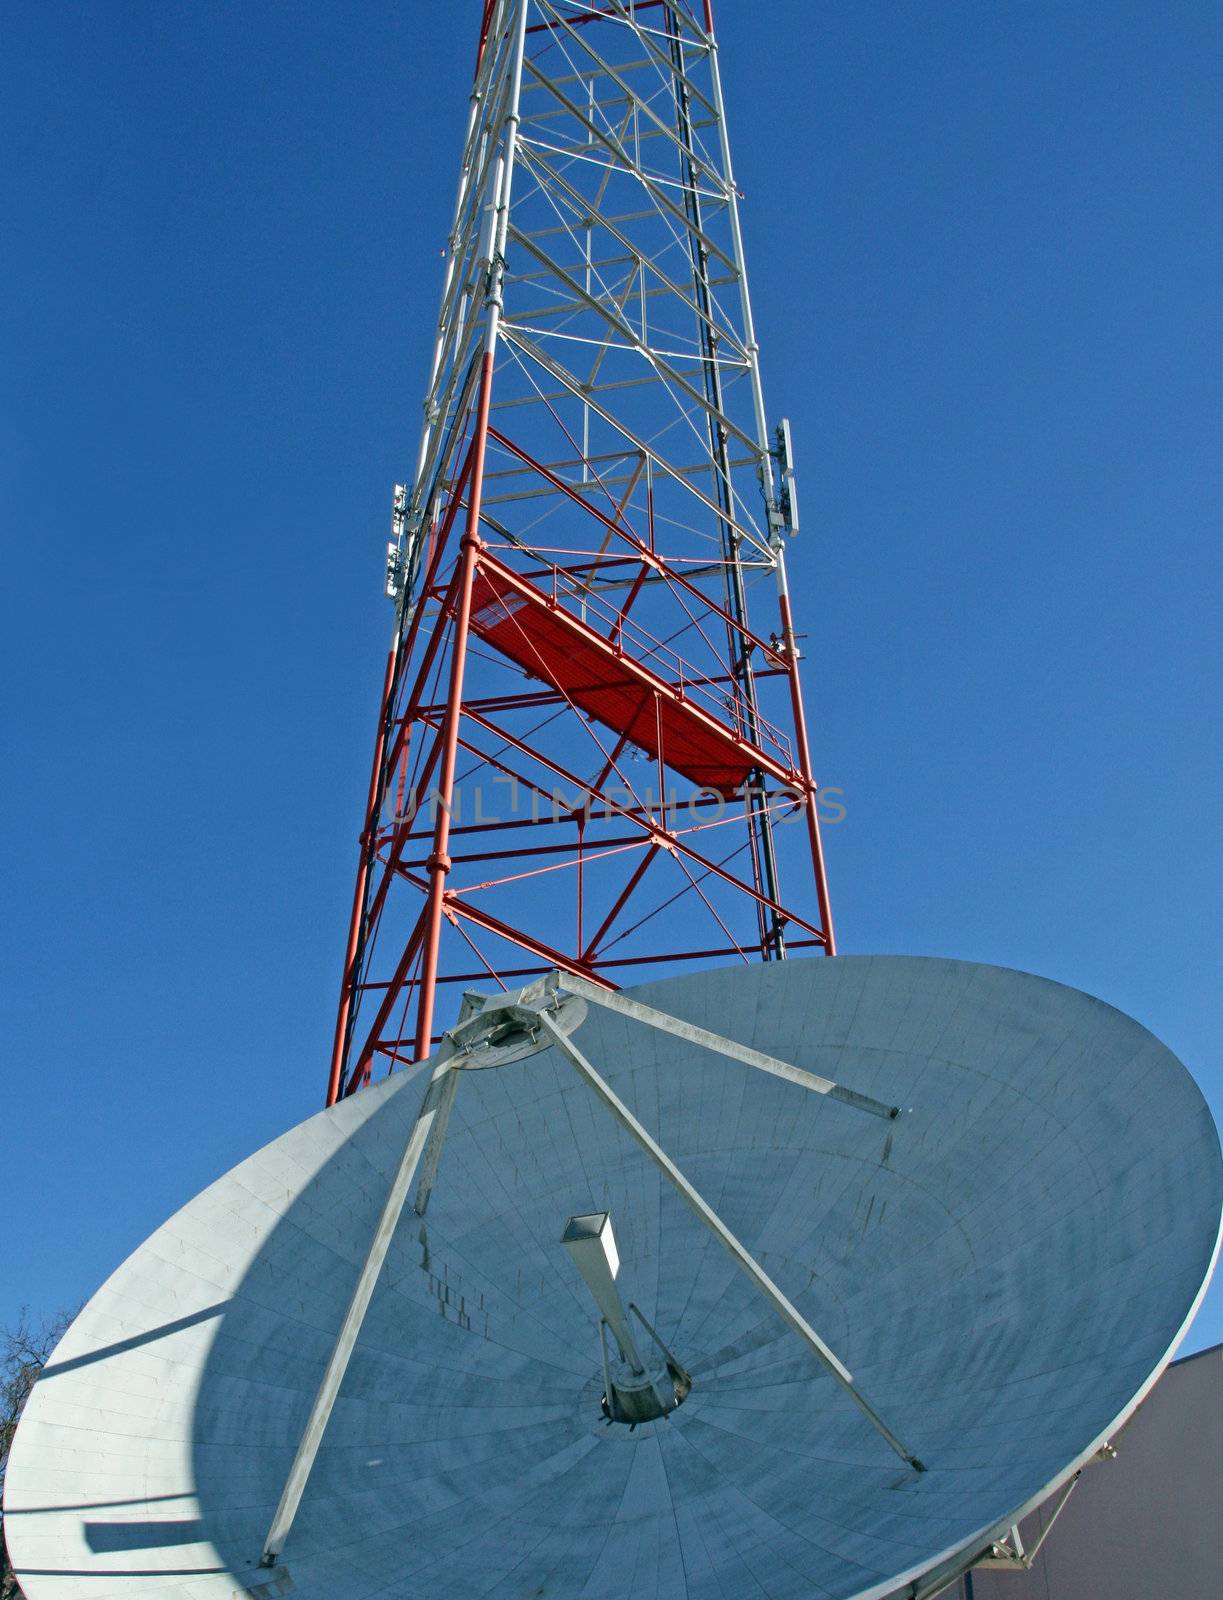 A satellite dish and radio tower on a clear blue sky.